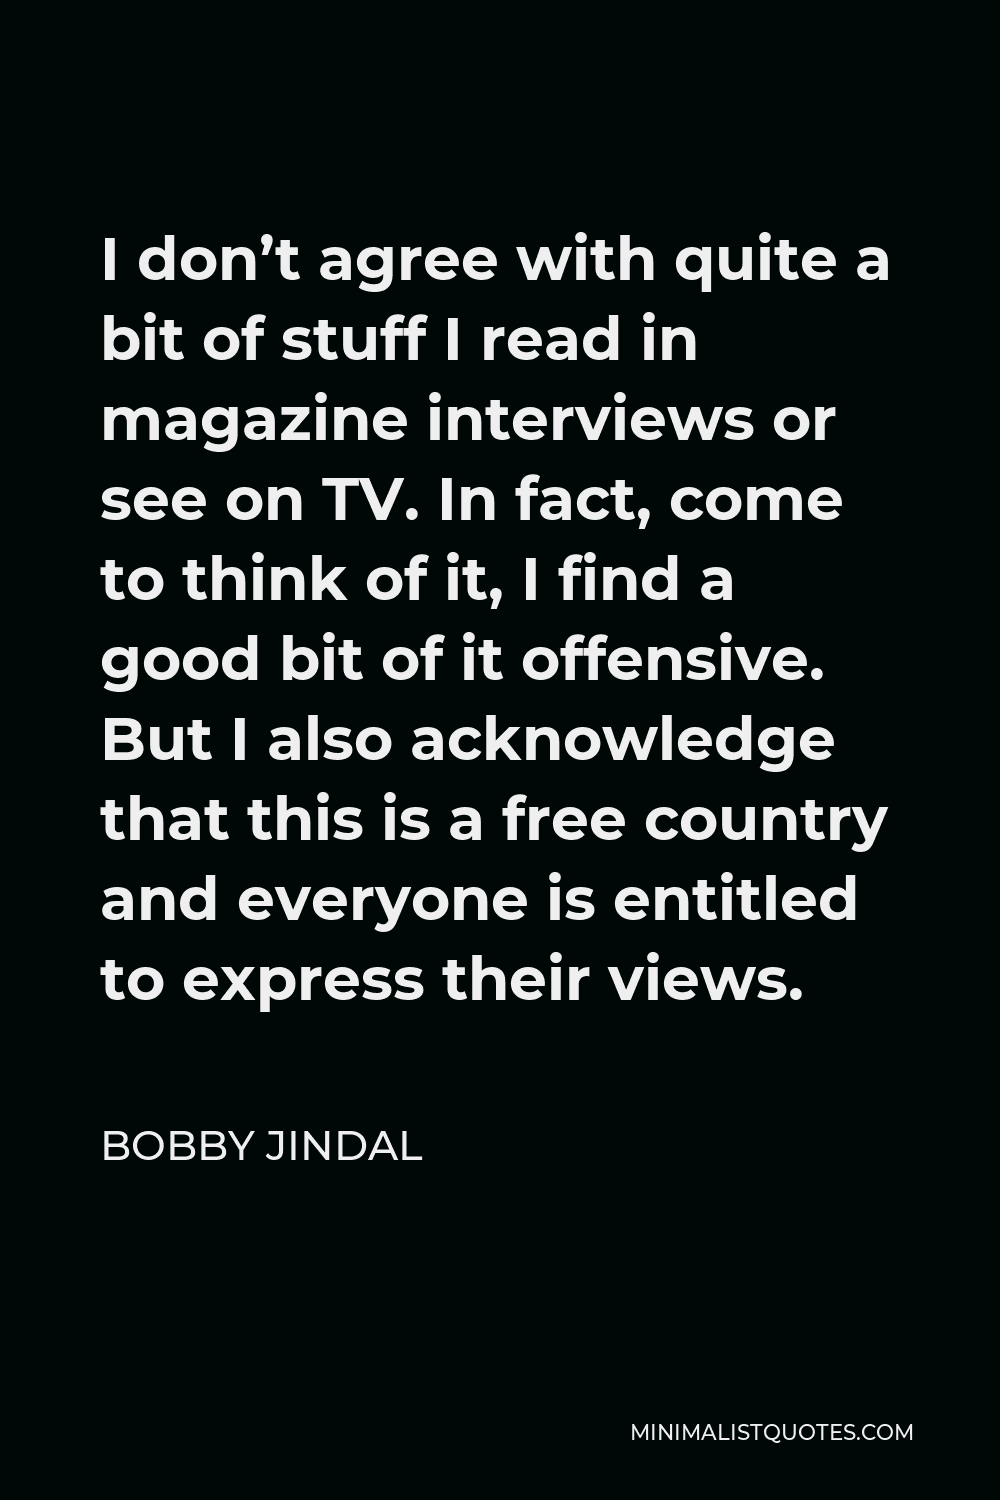 Bobby Jindal Quote - I don’t agree with quite a bit of stuff I read in magazine interviews or see on TV. In fact, come to think of it, I find a good bit of it offensive. But I also acknowledge that this is a free country and everyone is entitled to express their views.